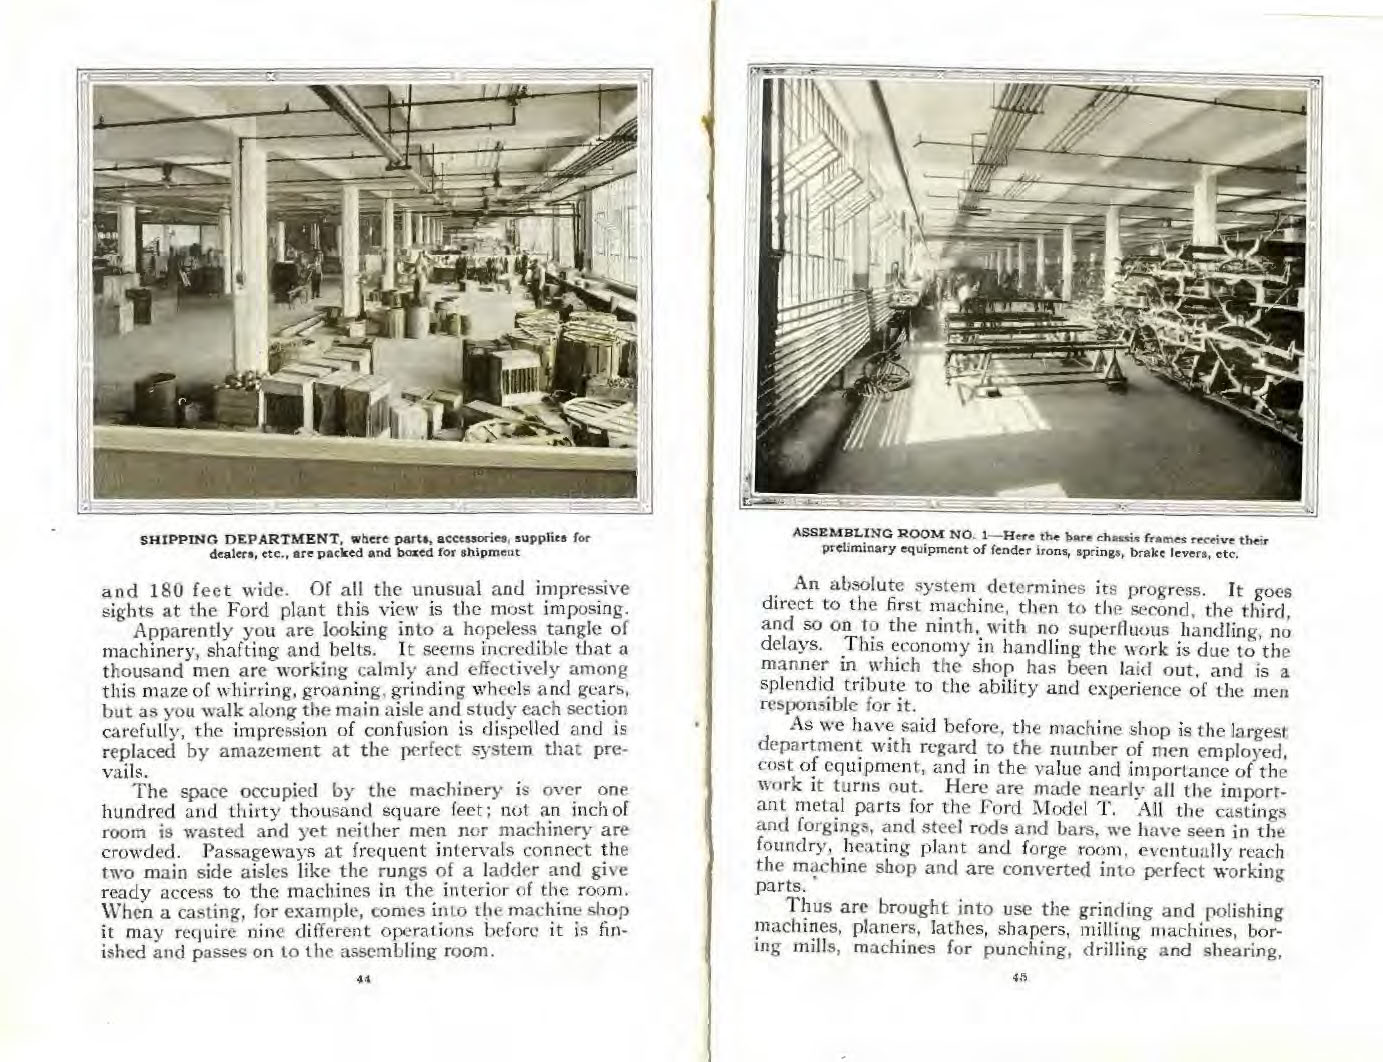 1912_Ford_Factory_Facts_Cdn-44-45